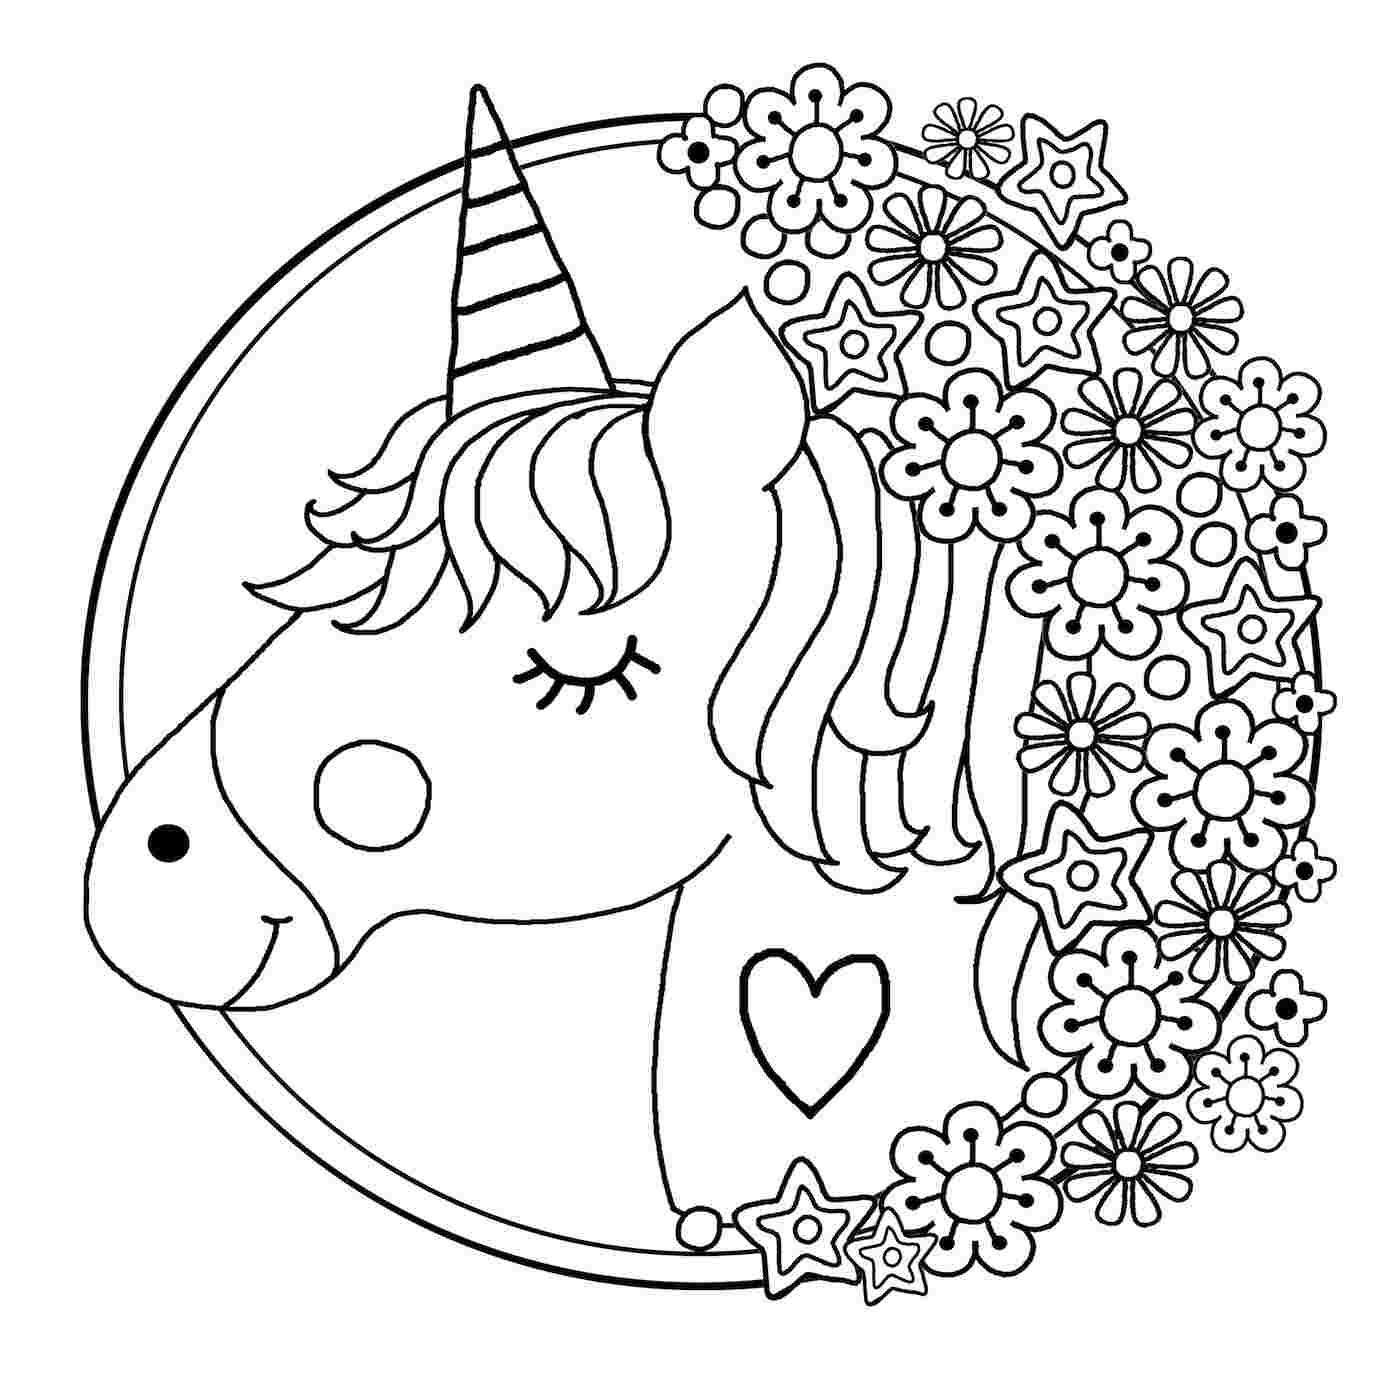 Coloring Pages : Free Printable Coloring Pictures Unicorns Unicorn ...